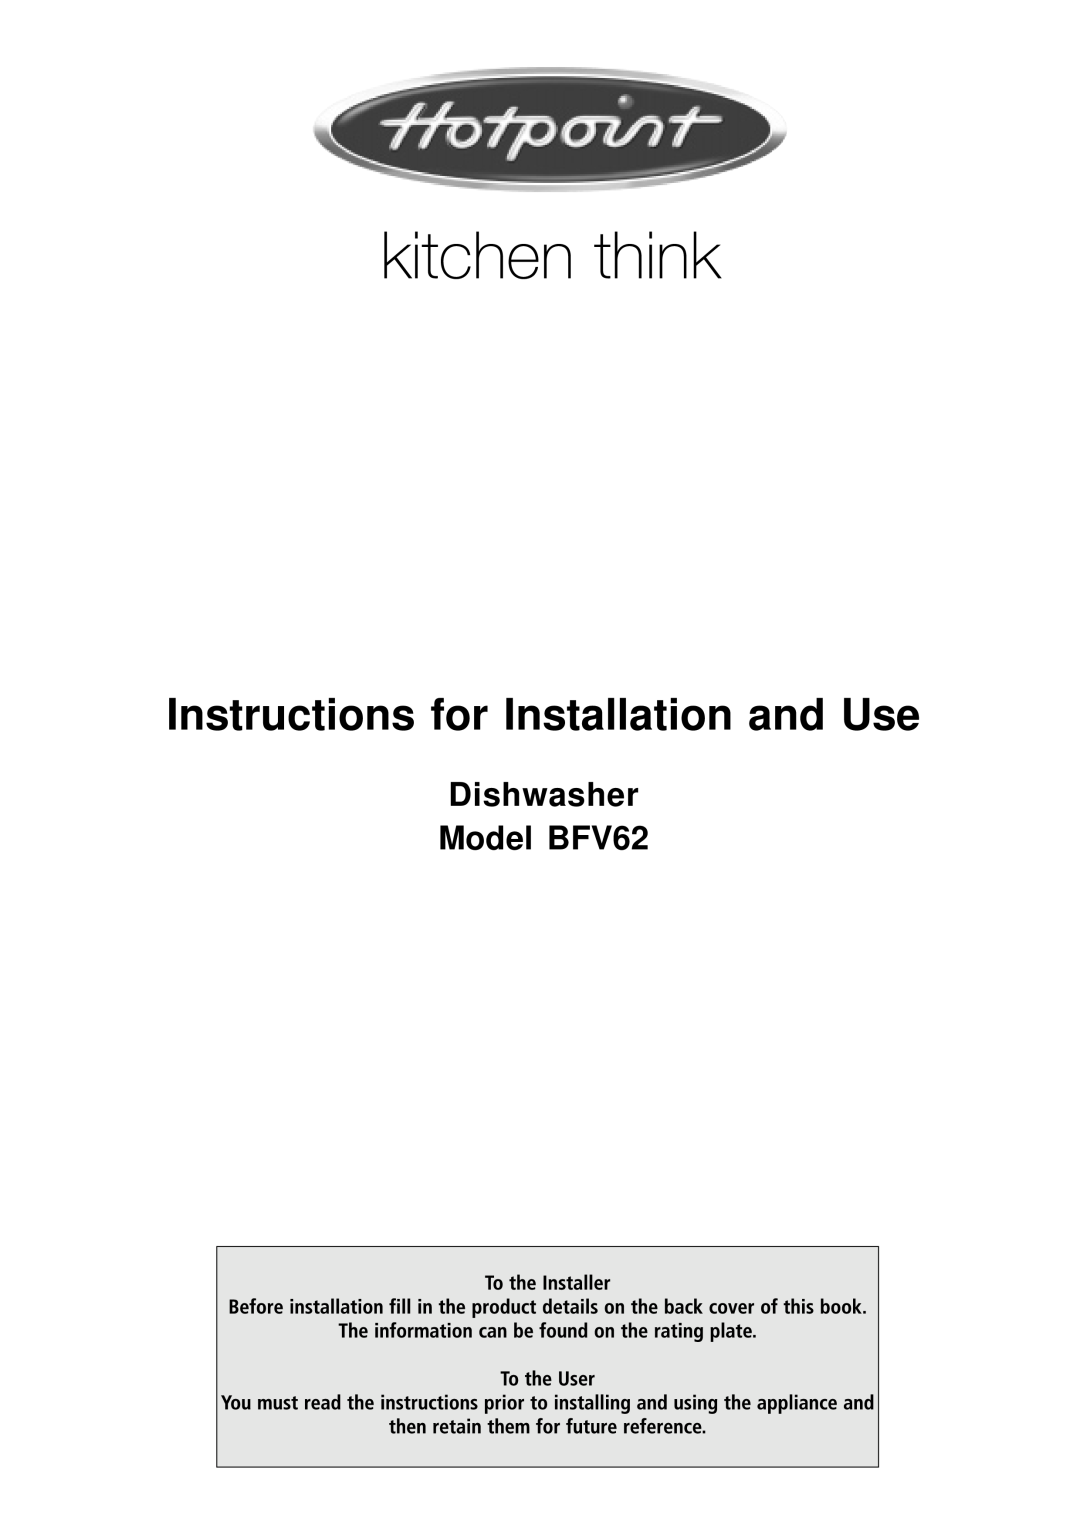 Hotpoint manual Instructions for Installation and Use, Dishwasher Model BFV62 